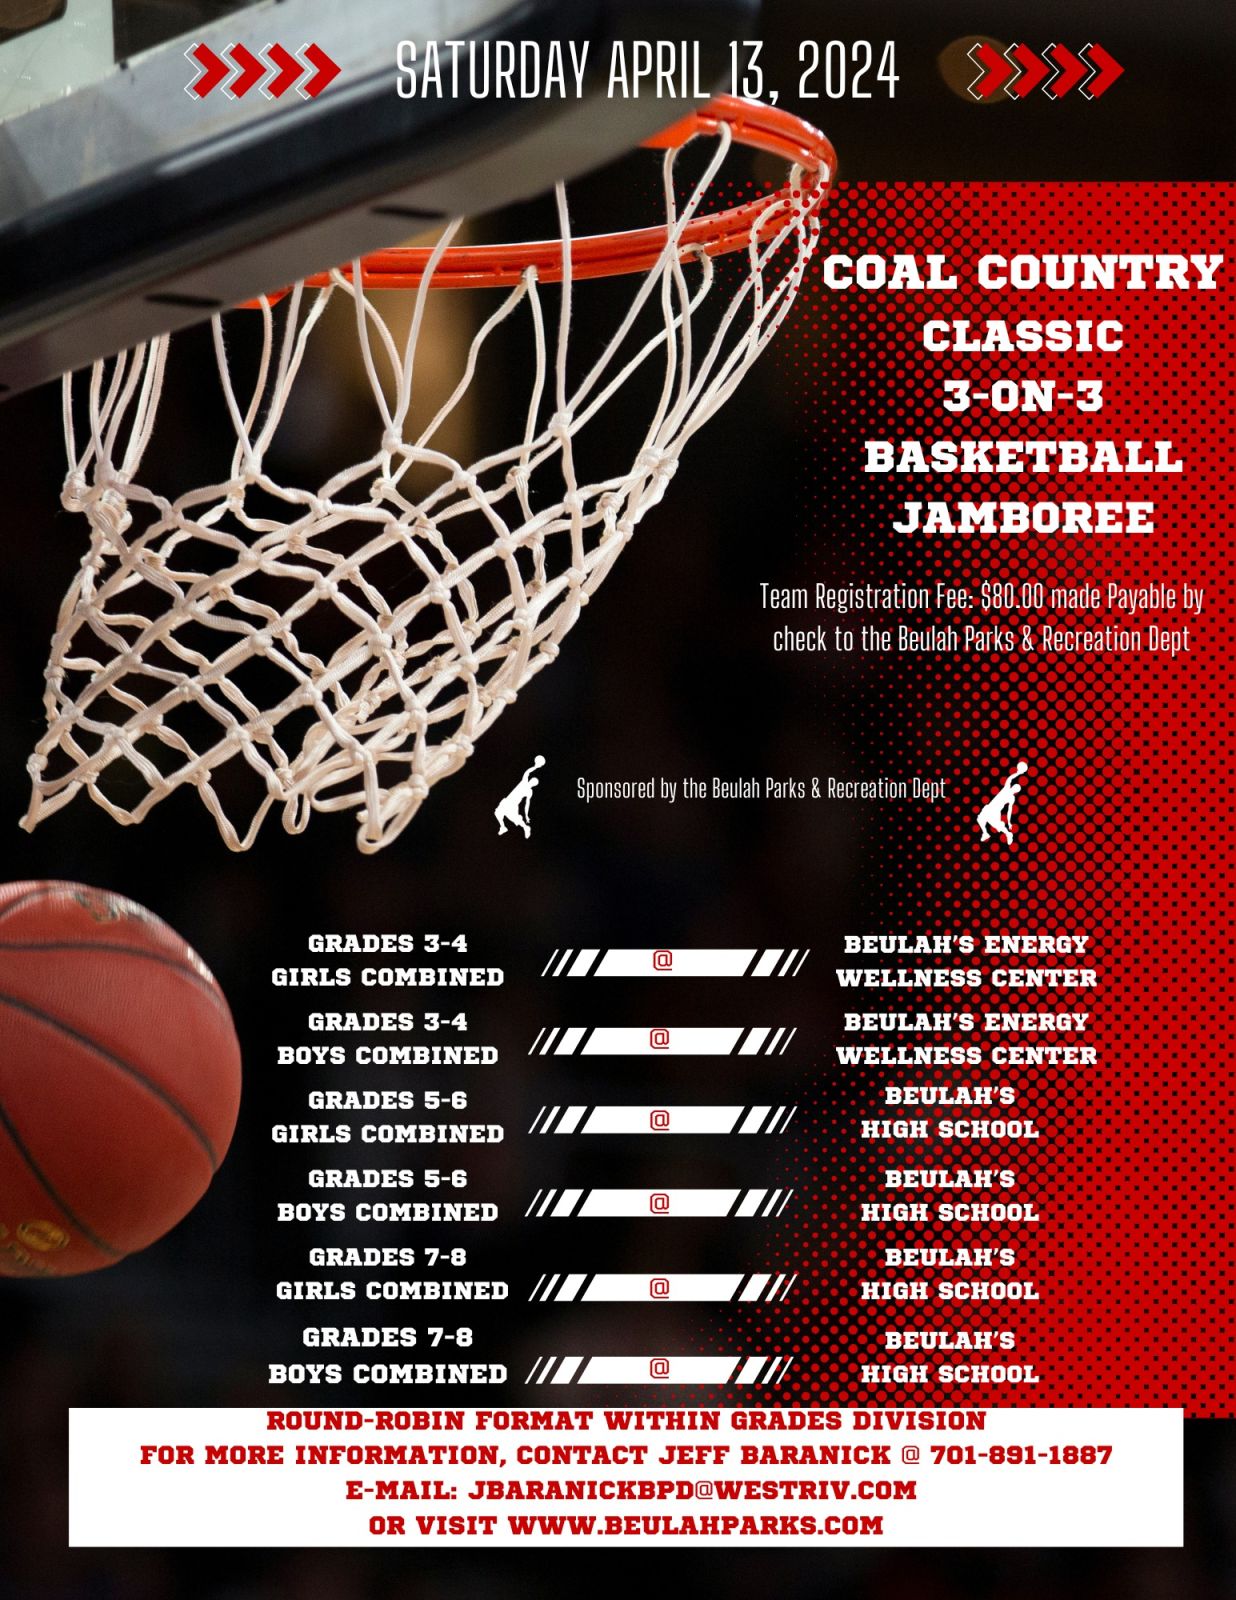 Event Promo Photo For Coal Country 3-on-3 Basketball Jamboree